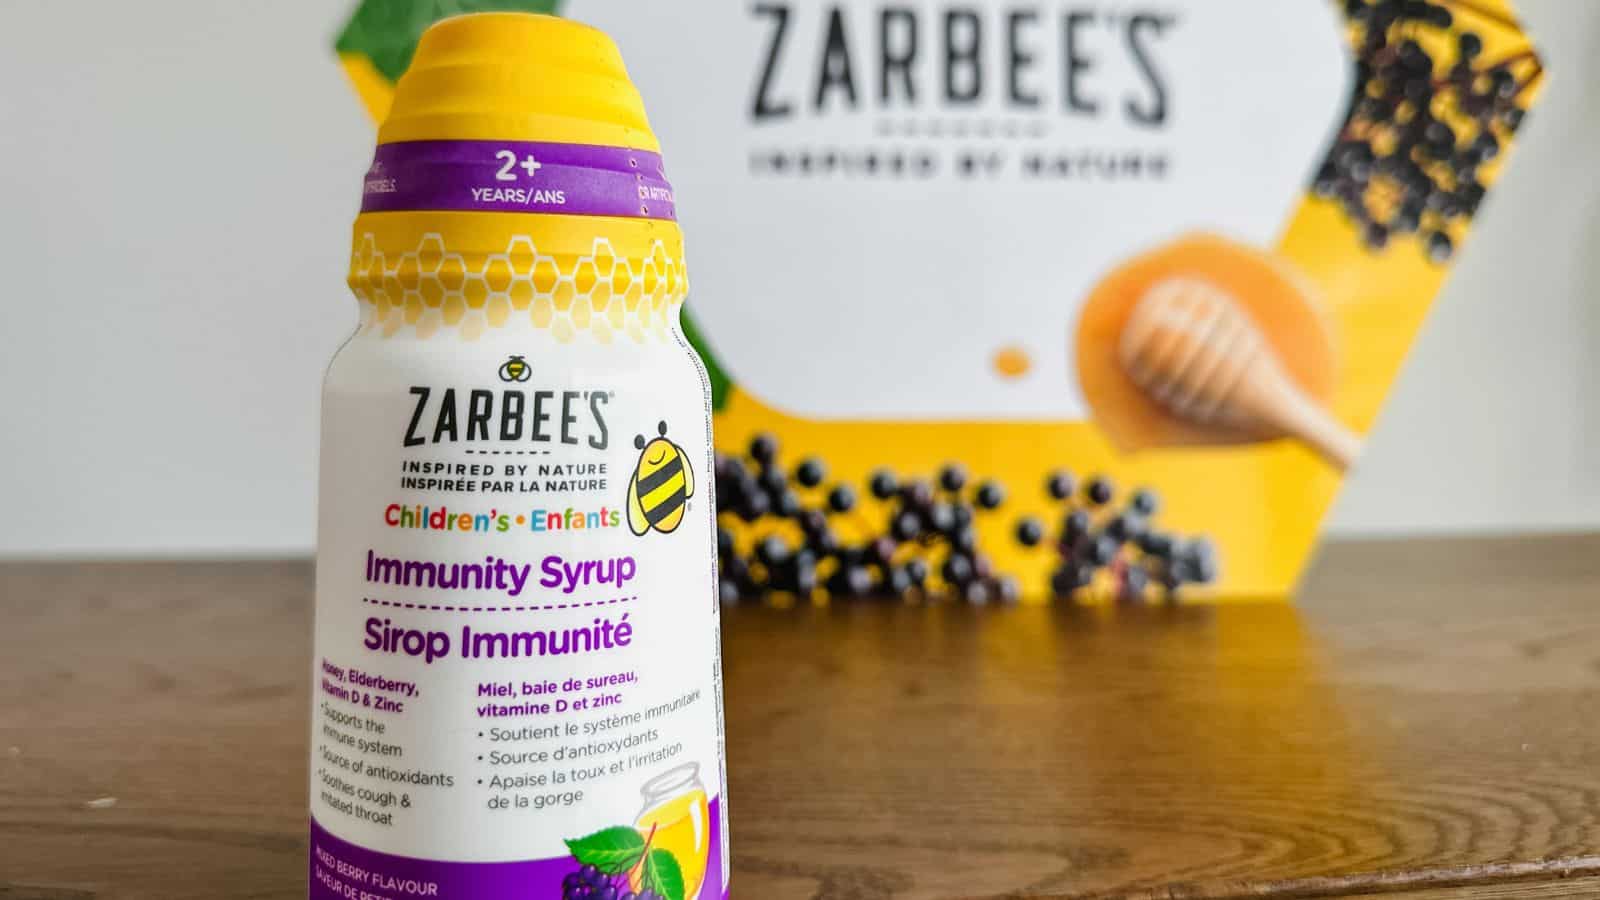 Zarbees Immunity Syrup